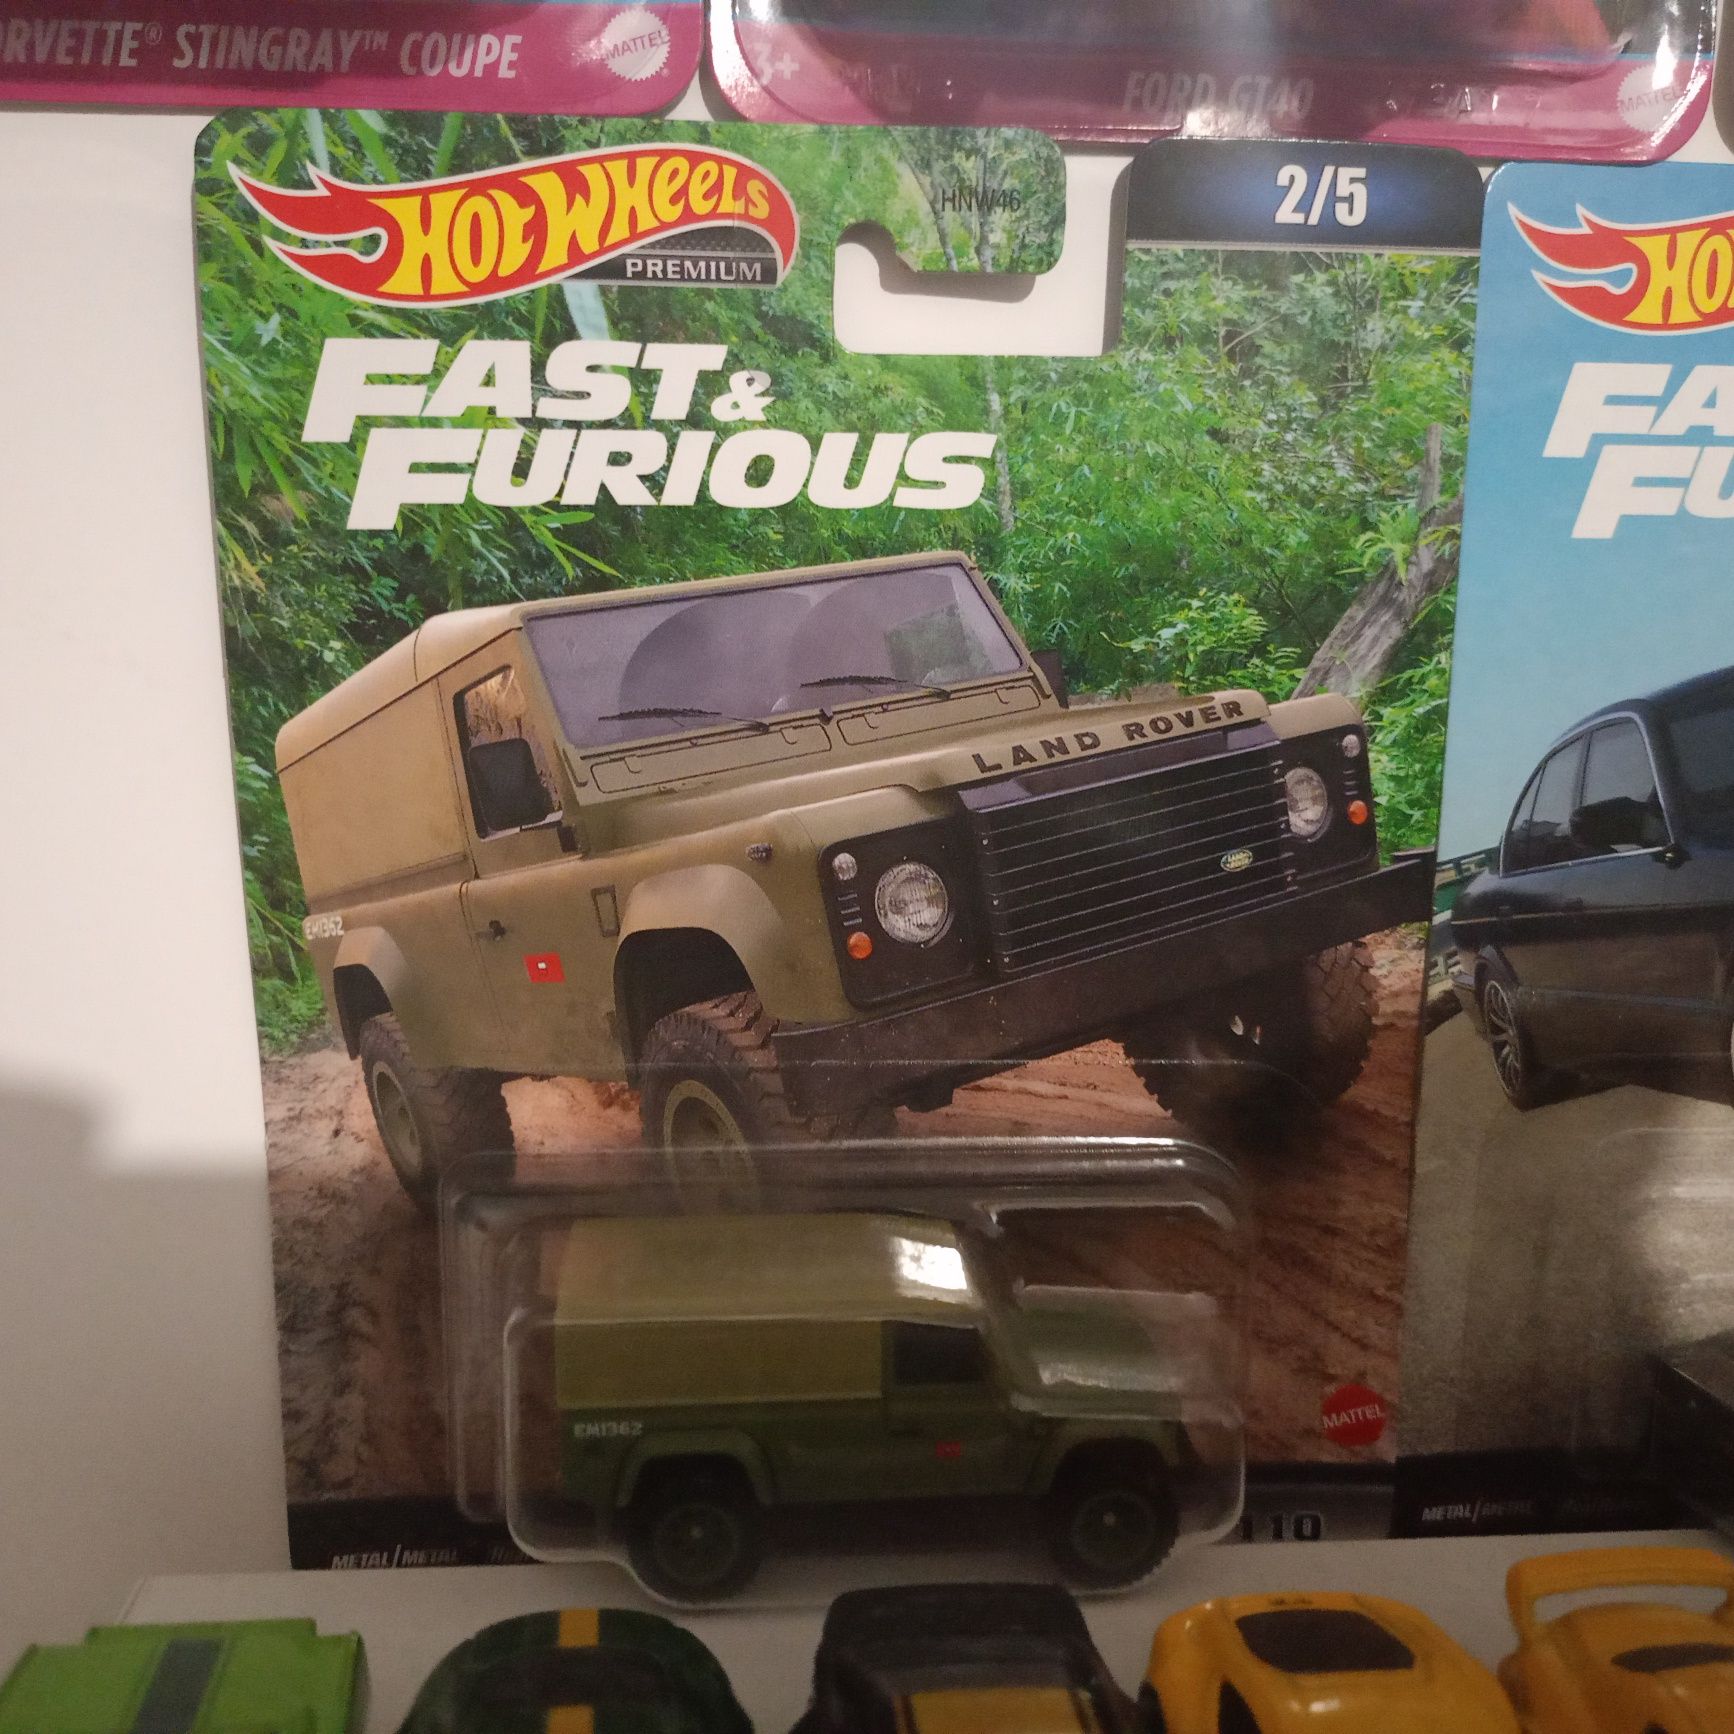 Hotwheels premium Fast and Furious Land Rover Defender